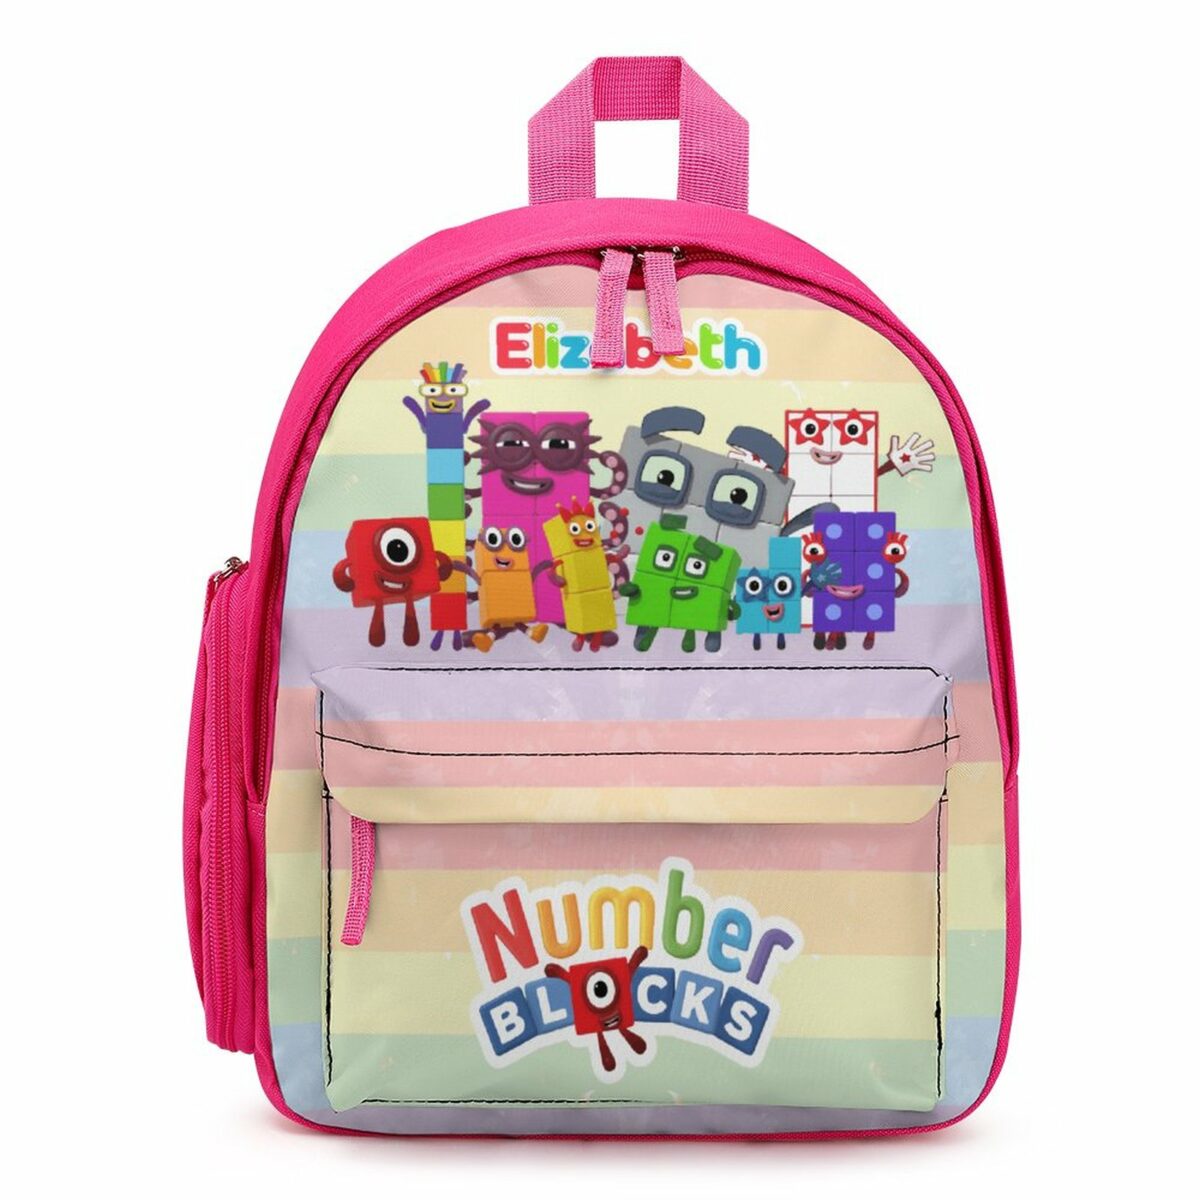 Personalized Number Blocks Children’s School Bag – Pink Toddlers Backpack Cool Kiddo 10